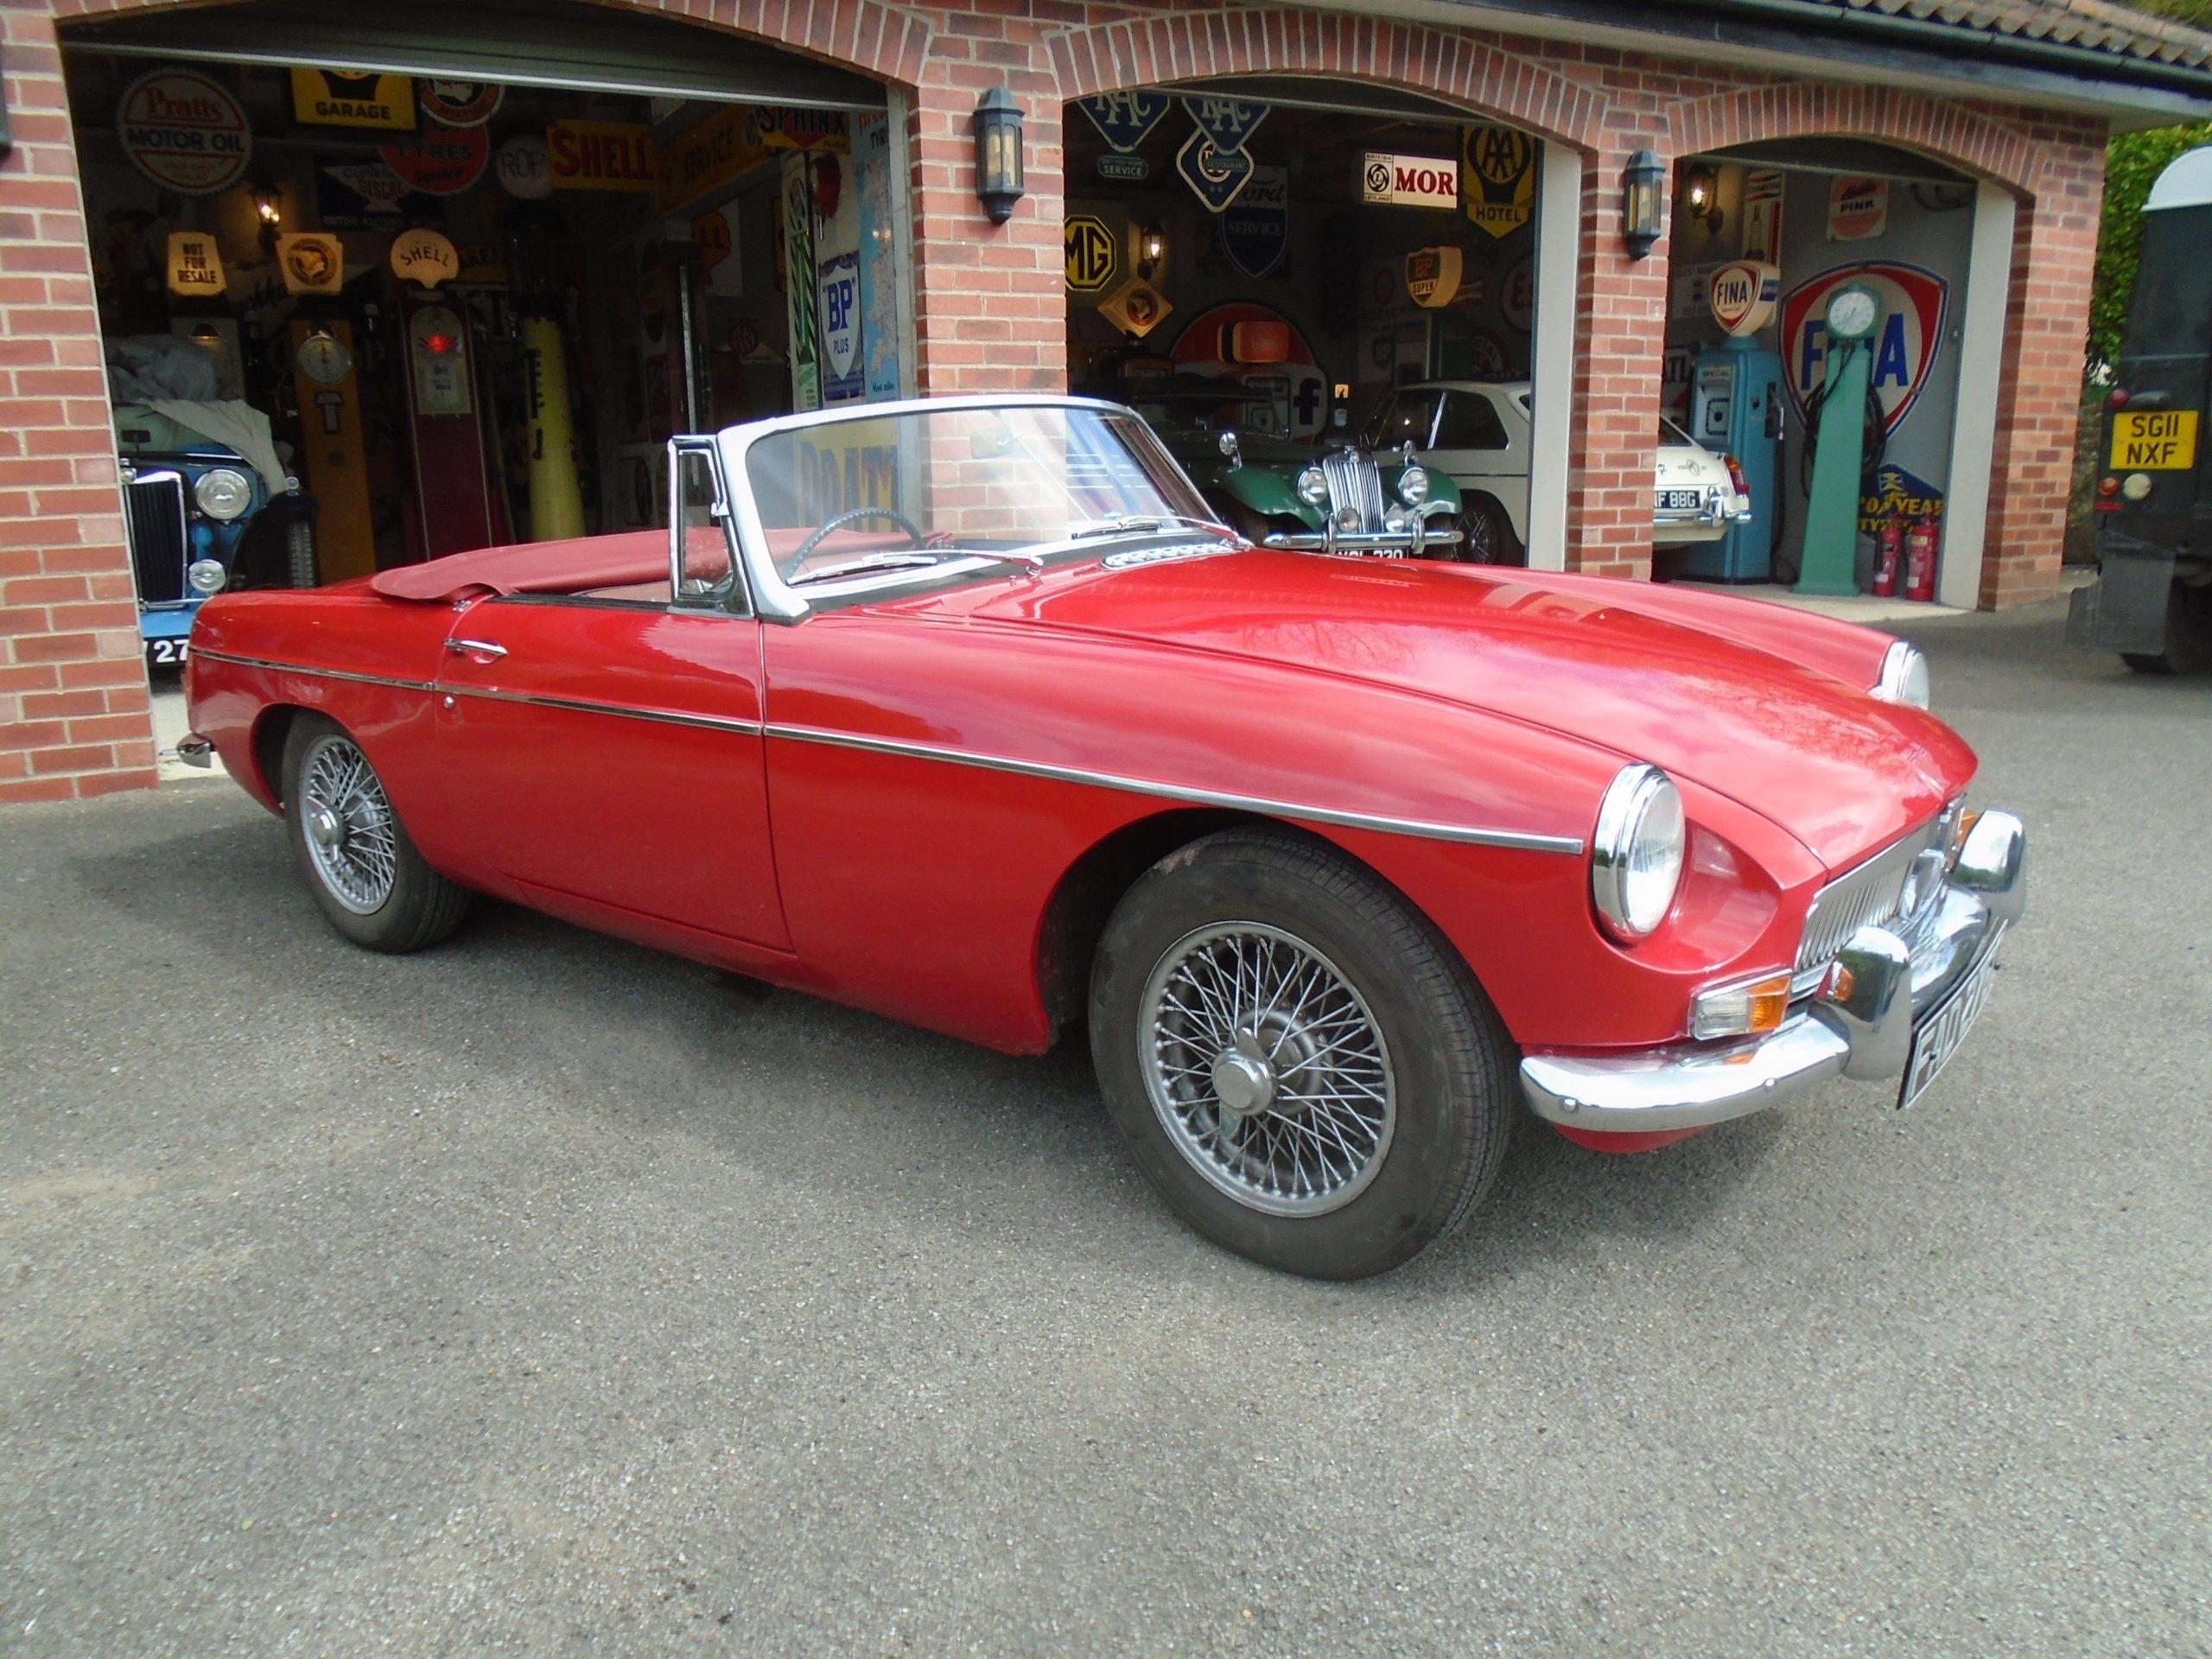 1965 MGB Roadster with Overdrive